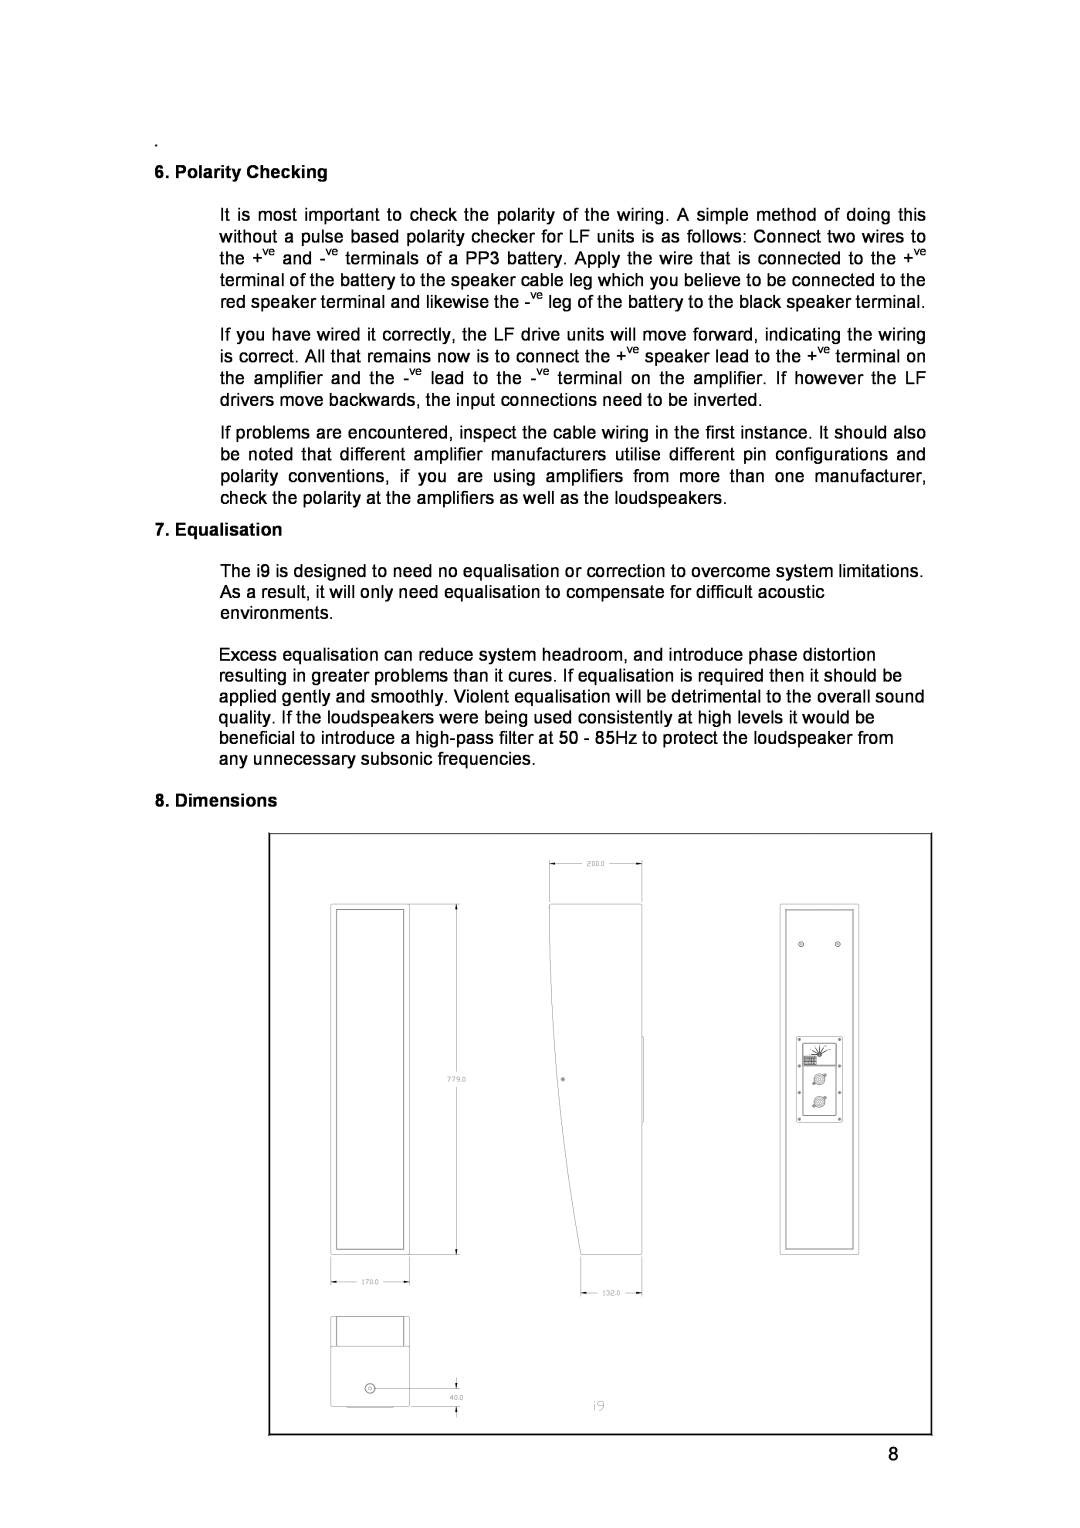 Tannoy I9 user manual Polarity Checking, Equalisation, Dimensions 